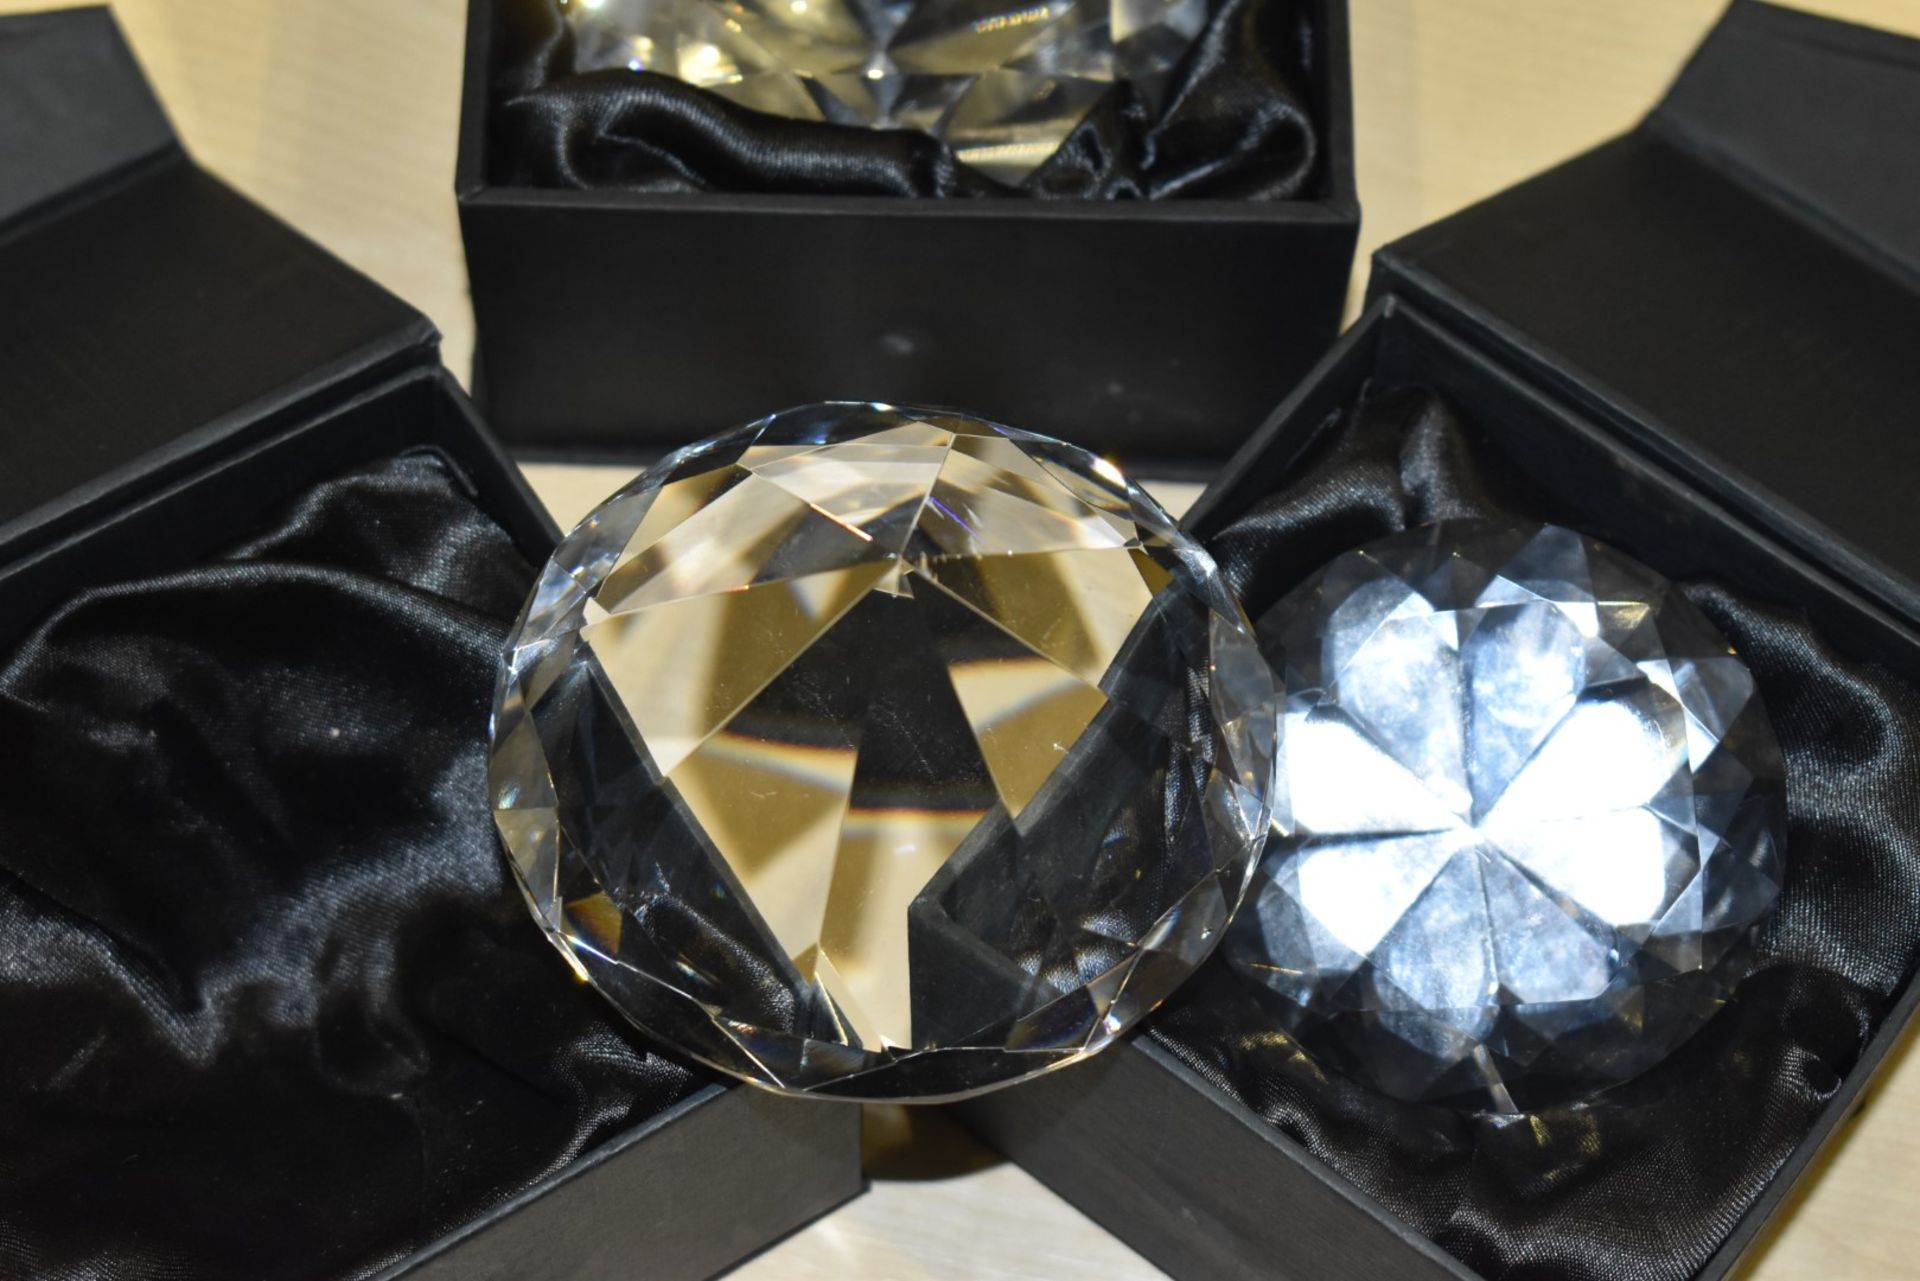 3 x Ice London Faux Diamond Paperweights - New and Boxed - Ref: In2128 wh1 pal1 - CL011 - - Image 8 of 8